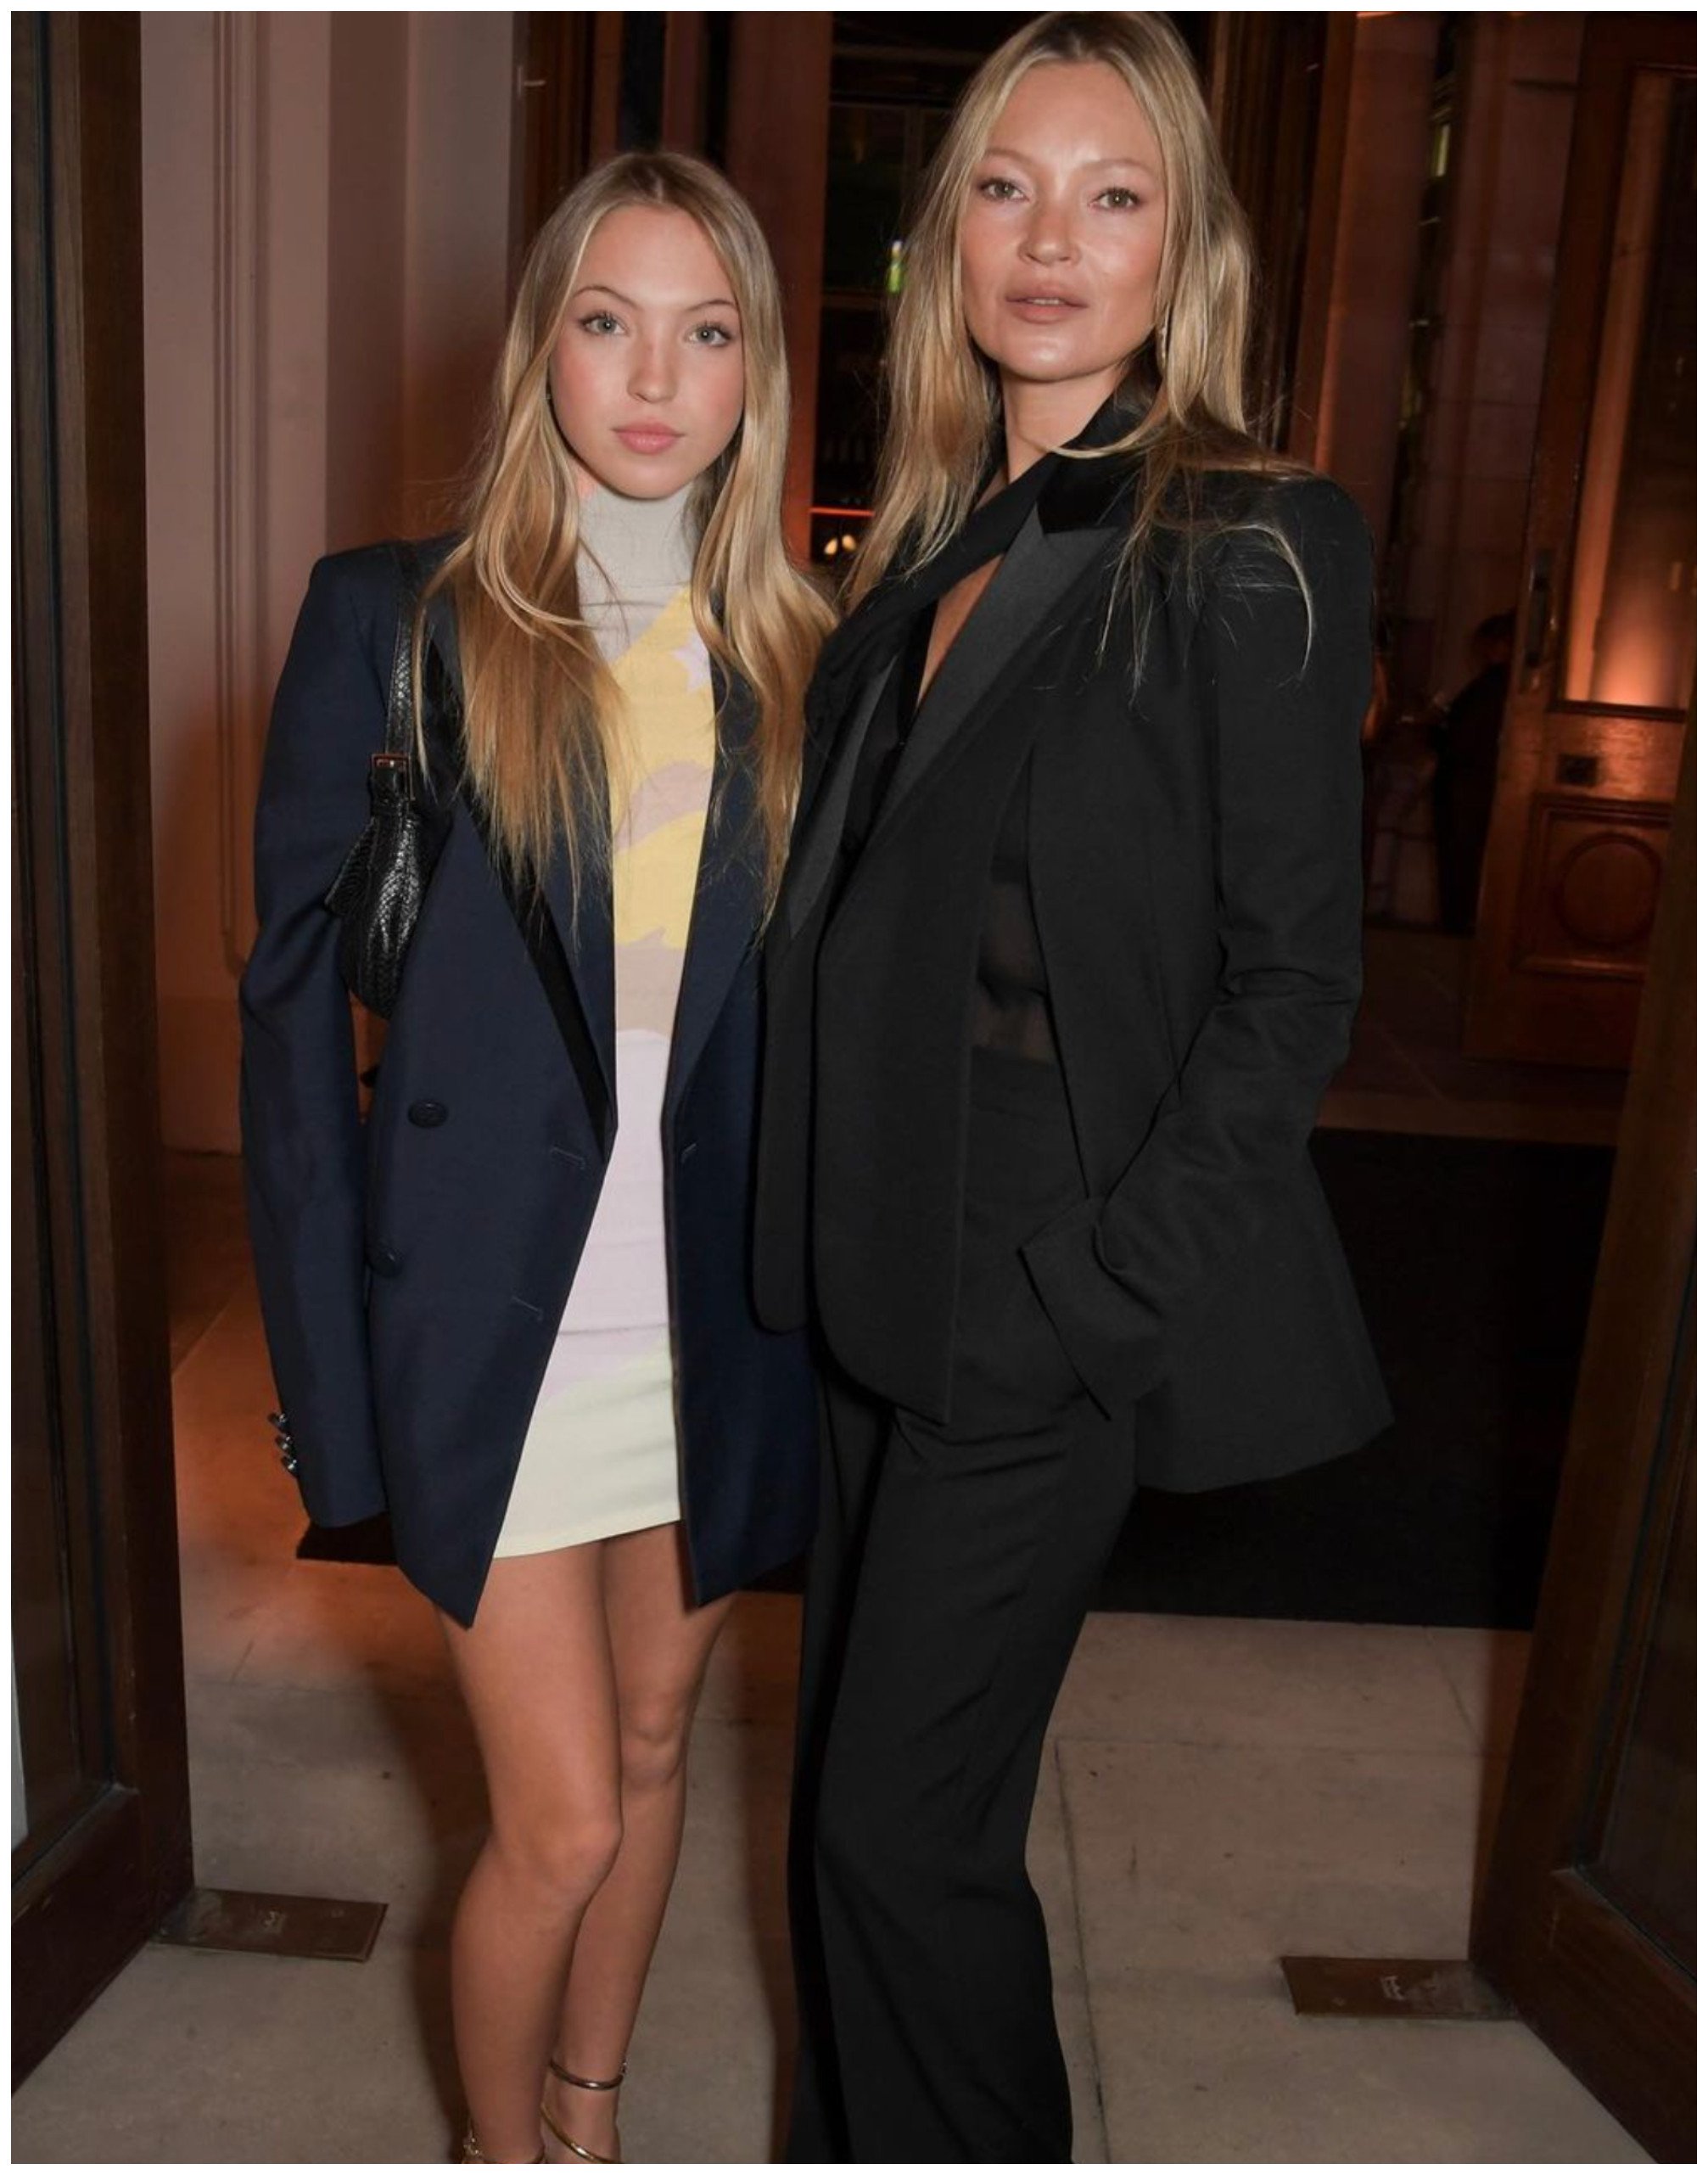 Lila and Kate Moss doing what they do best at The Fendi Set book launch in February 2022 – looking equally glamorous. Photo: @katemossagency/Instagram